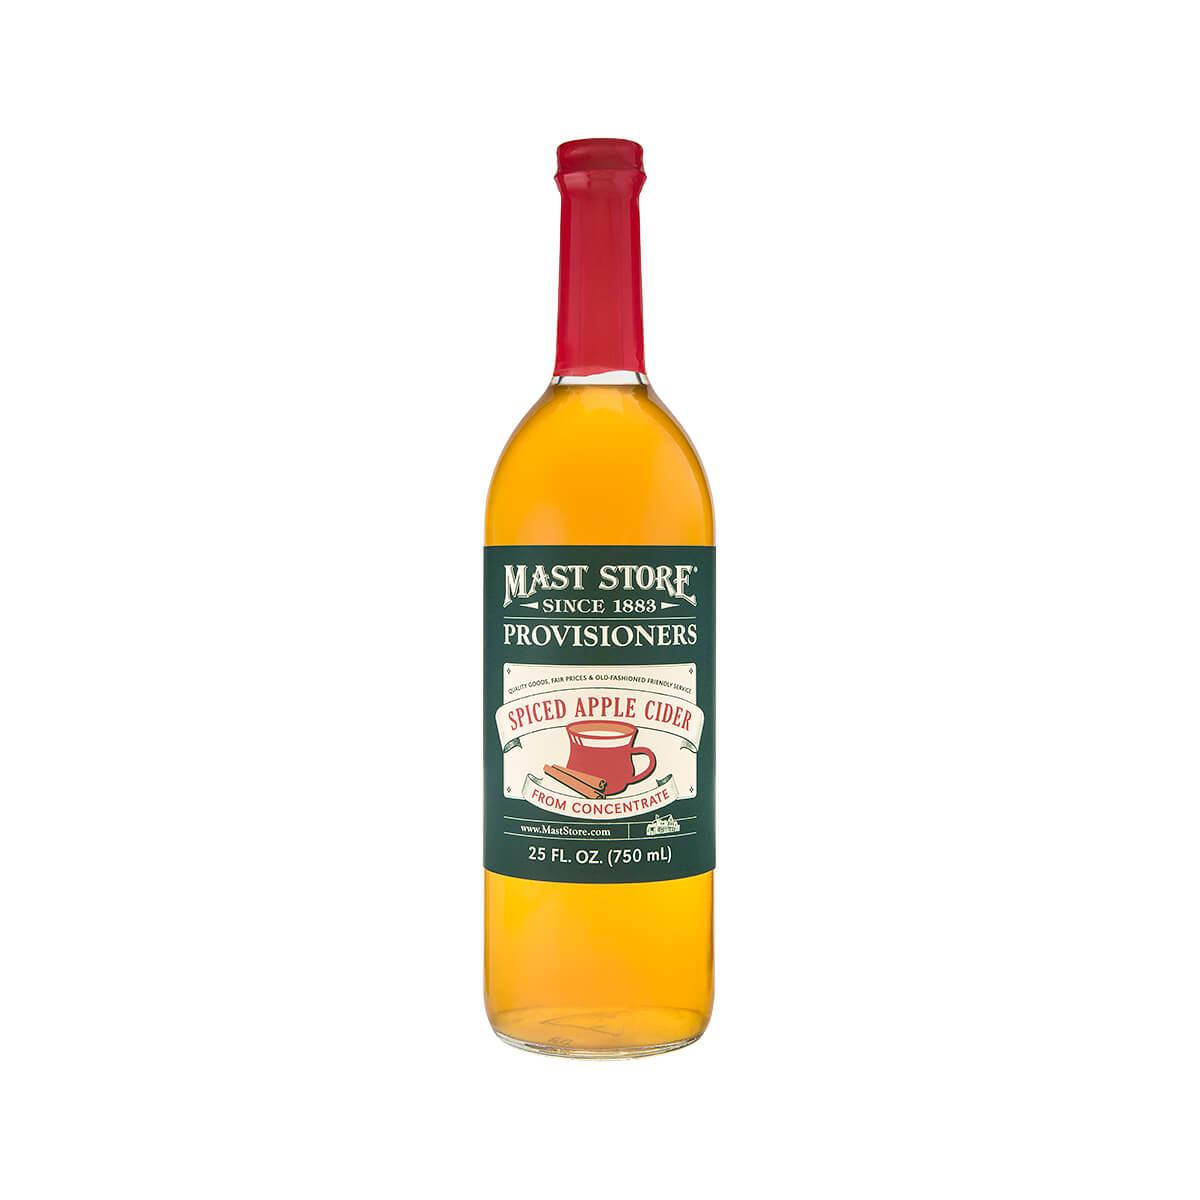  Mast Store Provisioners Spiced Apple Cider